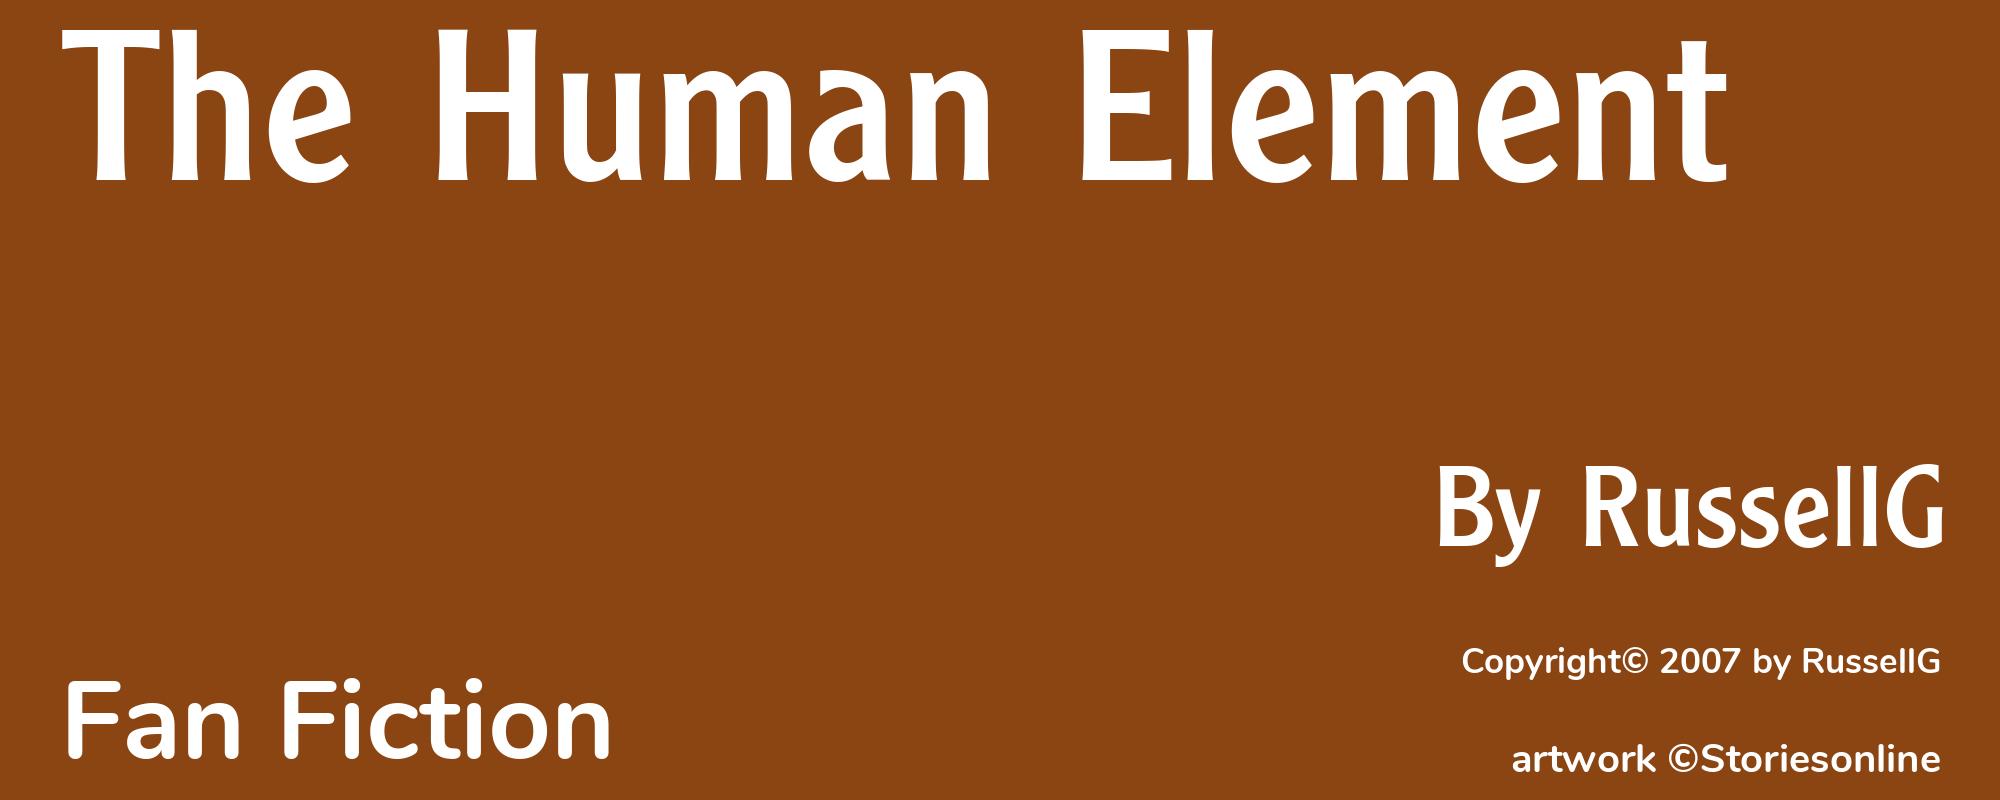 The Human Element - Cover